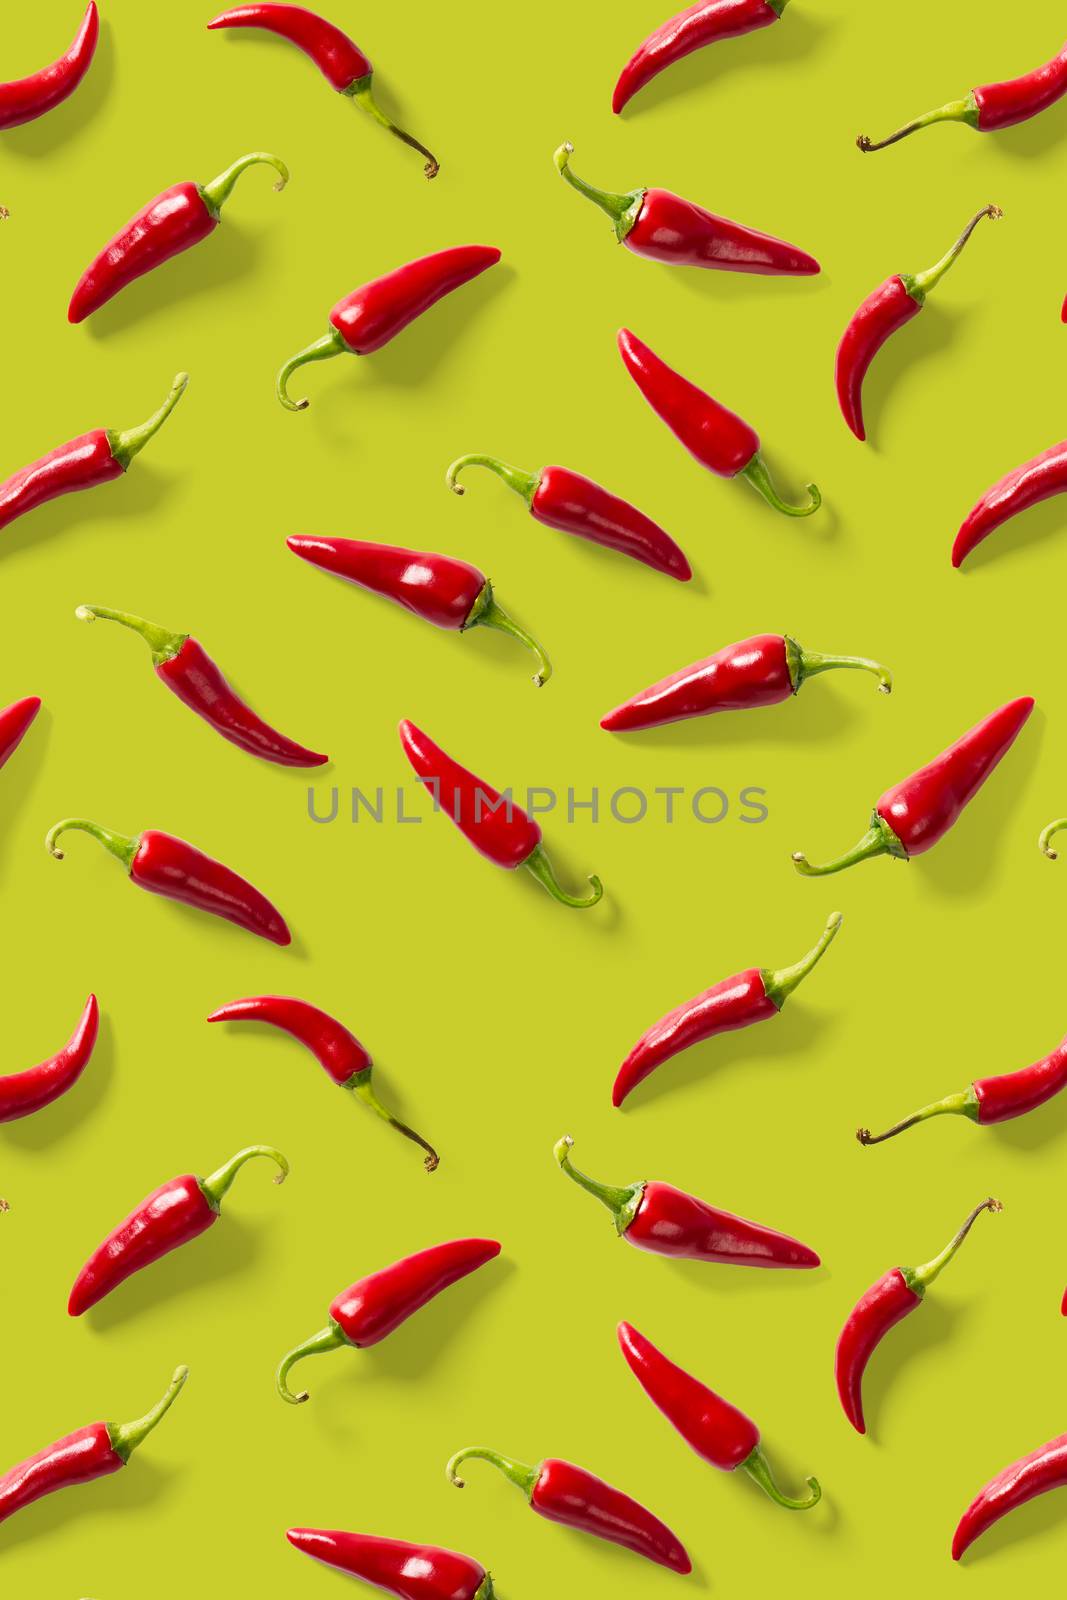 Creative background made of red chili or chilli on green backdrop. Minimal food backgroud. Red hot chilli peppers background. by PhotoTime